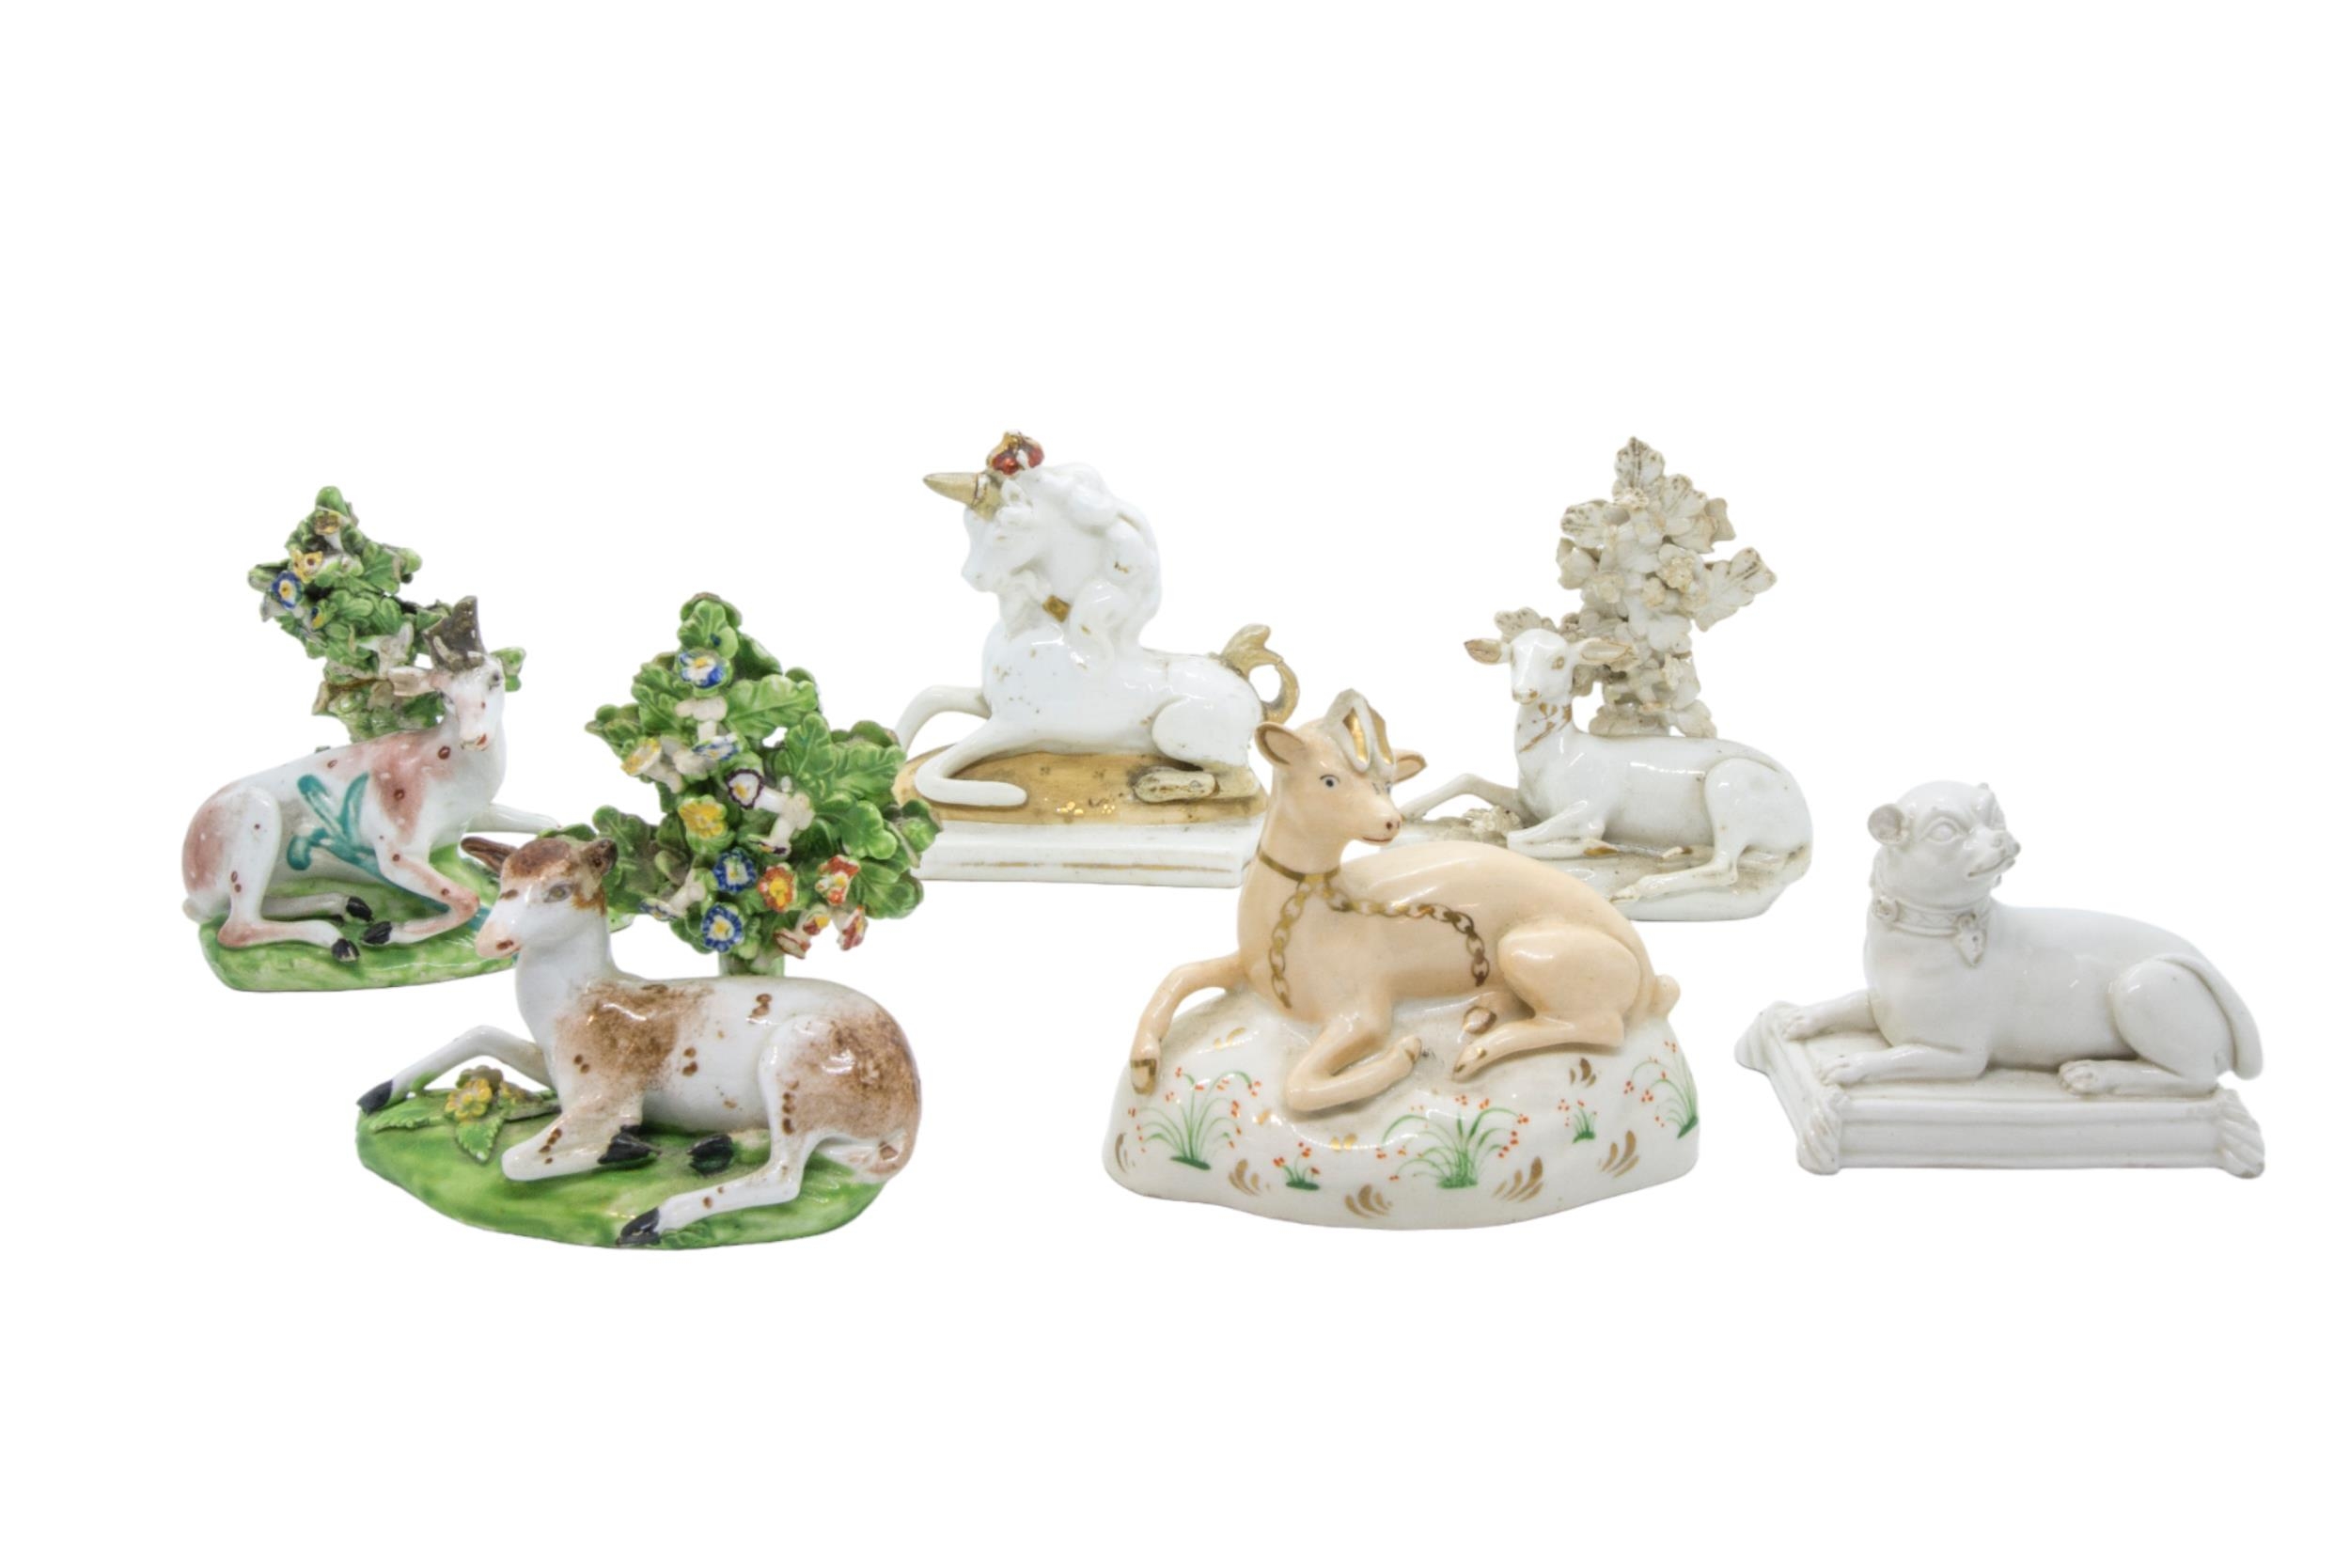 A LARGE COLLECTION OF ANIMAL FIGURINES 18th and 19th century - Image 3 of 6